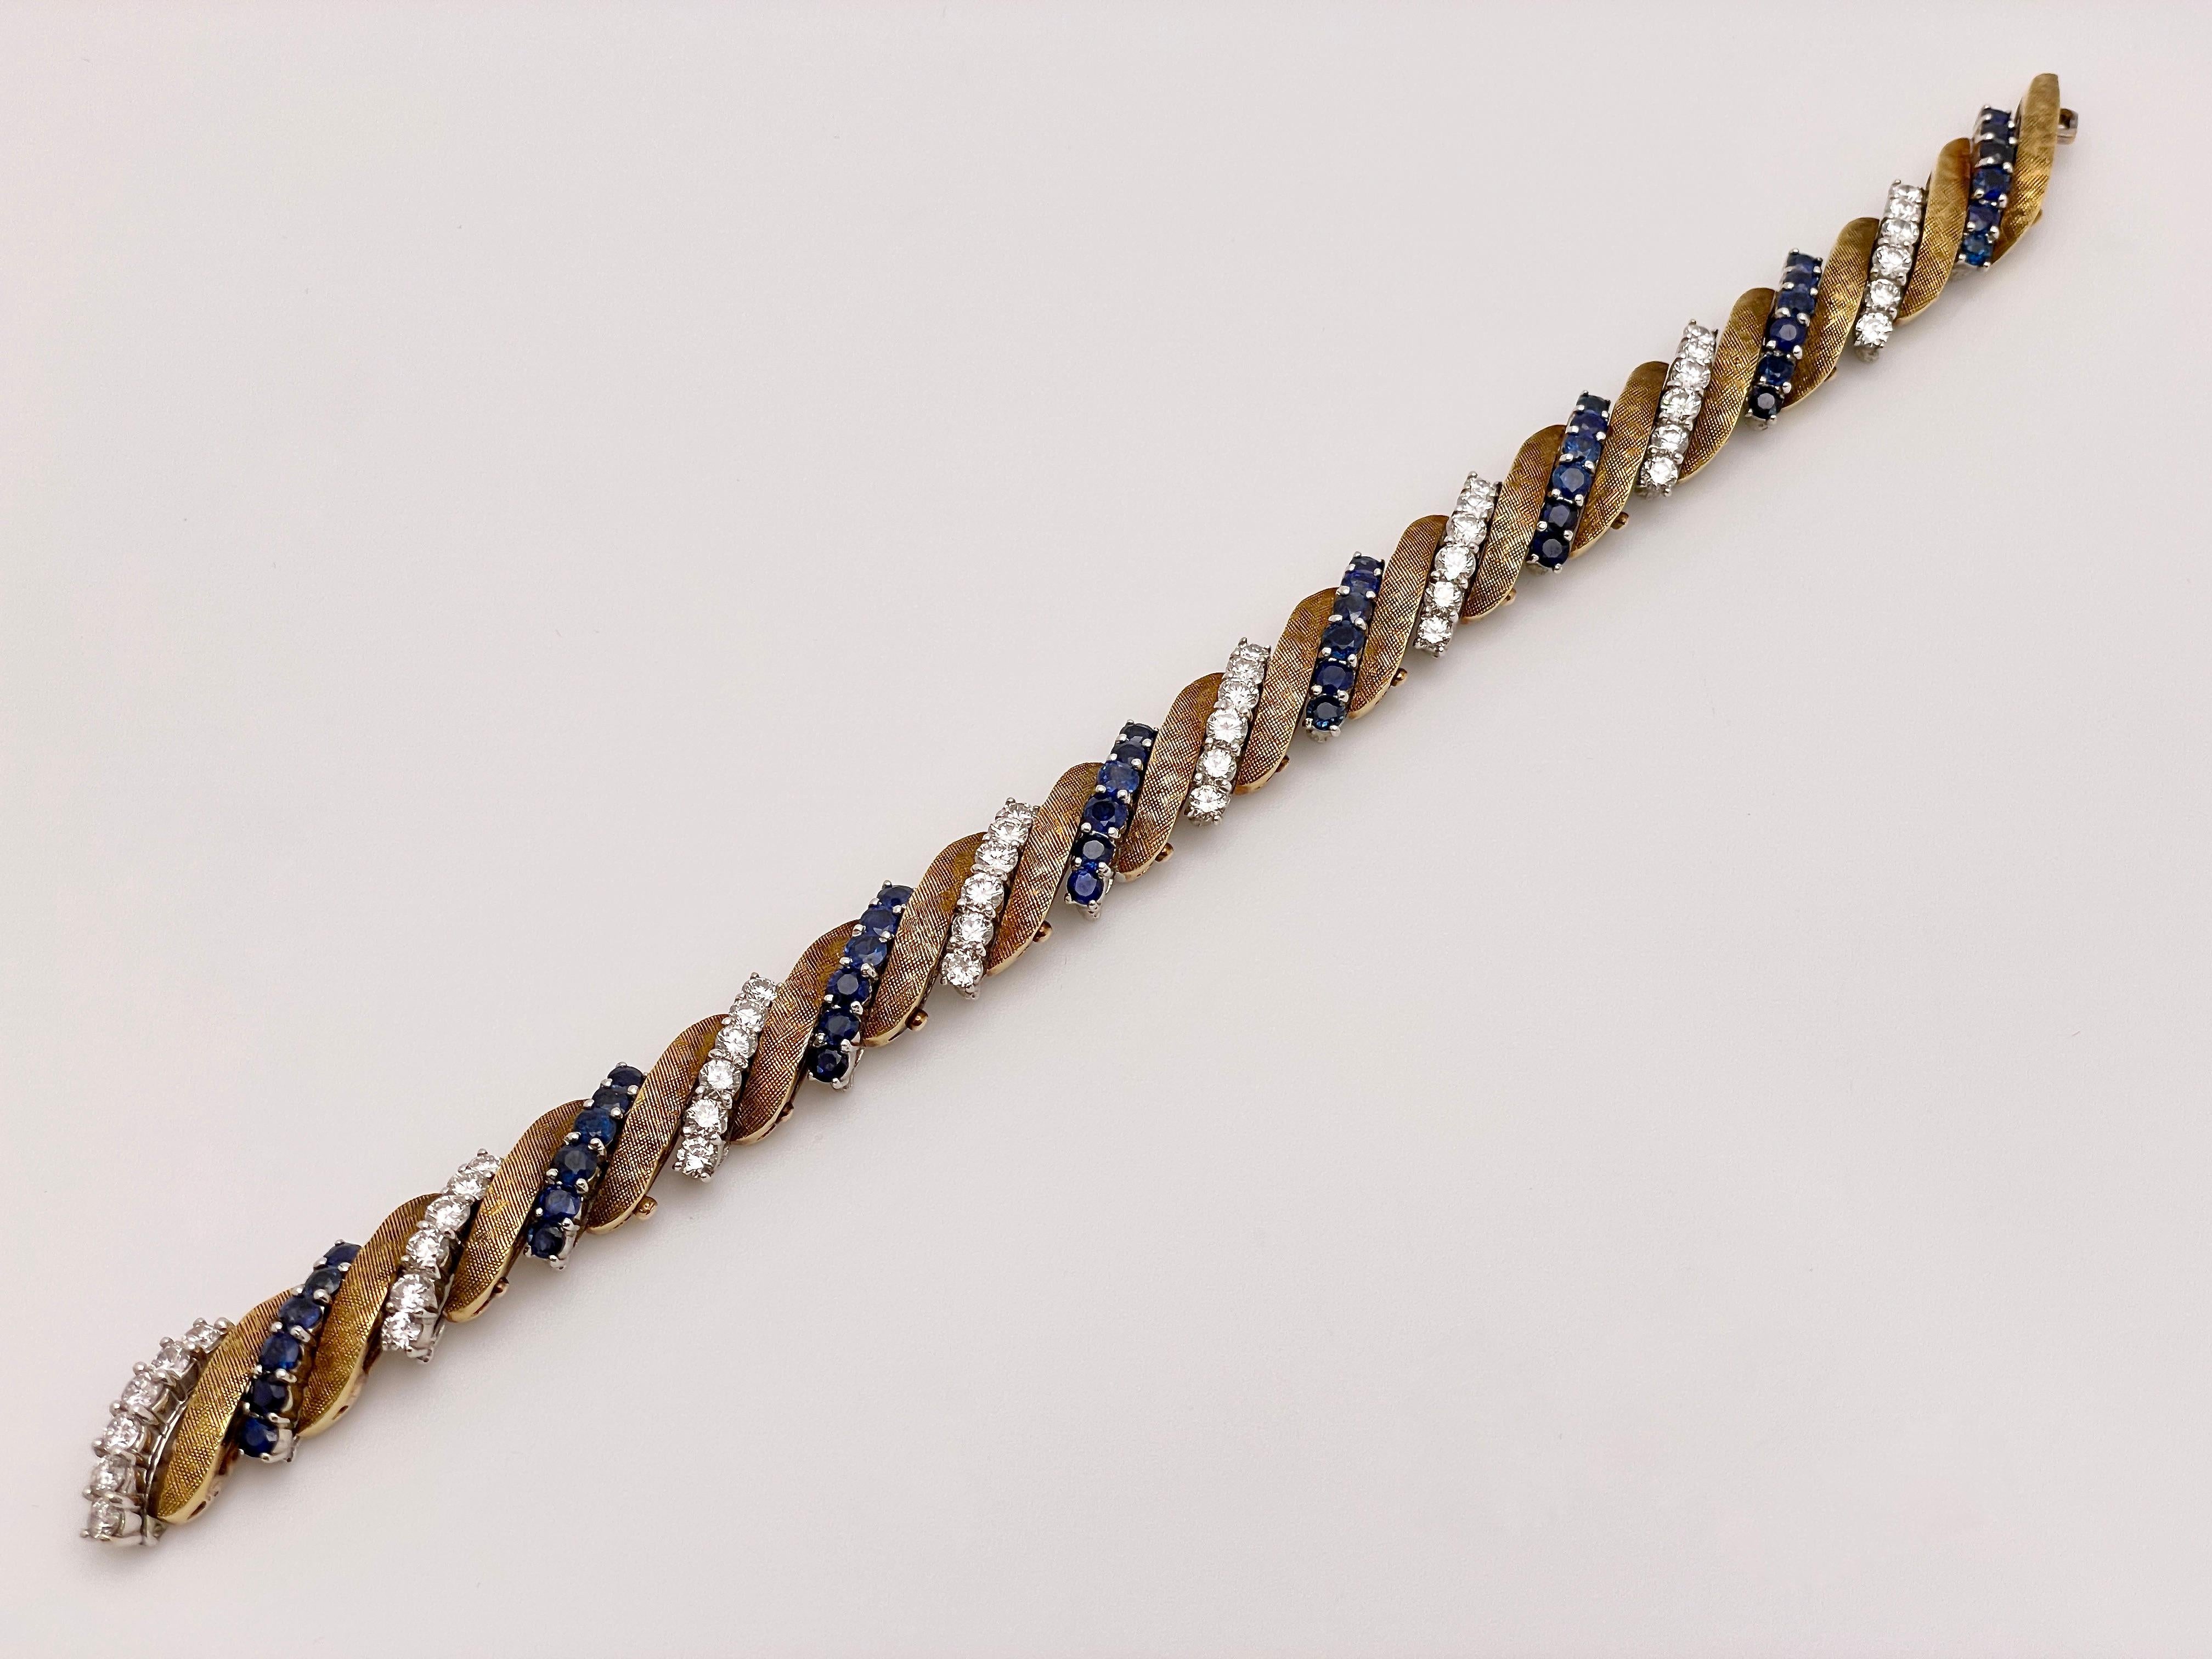 An original antique 14K white and yellow gold diamond and sapphire bracelet. Boasting eight rows of round brilliant cut diamonds totaling to 48, and eight rows of round brilliant cut sapphires also totaling to 48. These rows are separated by